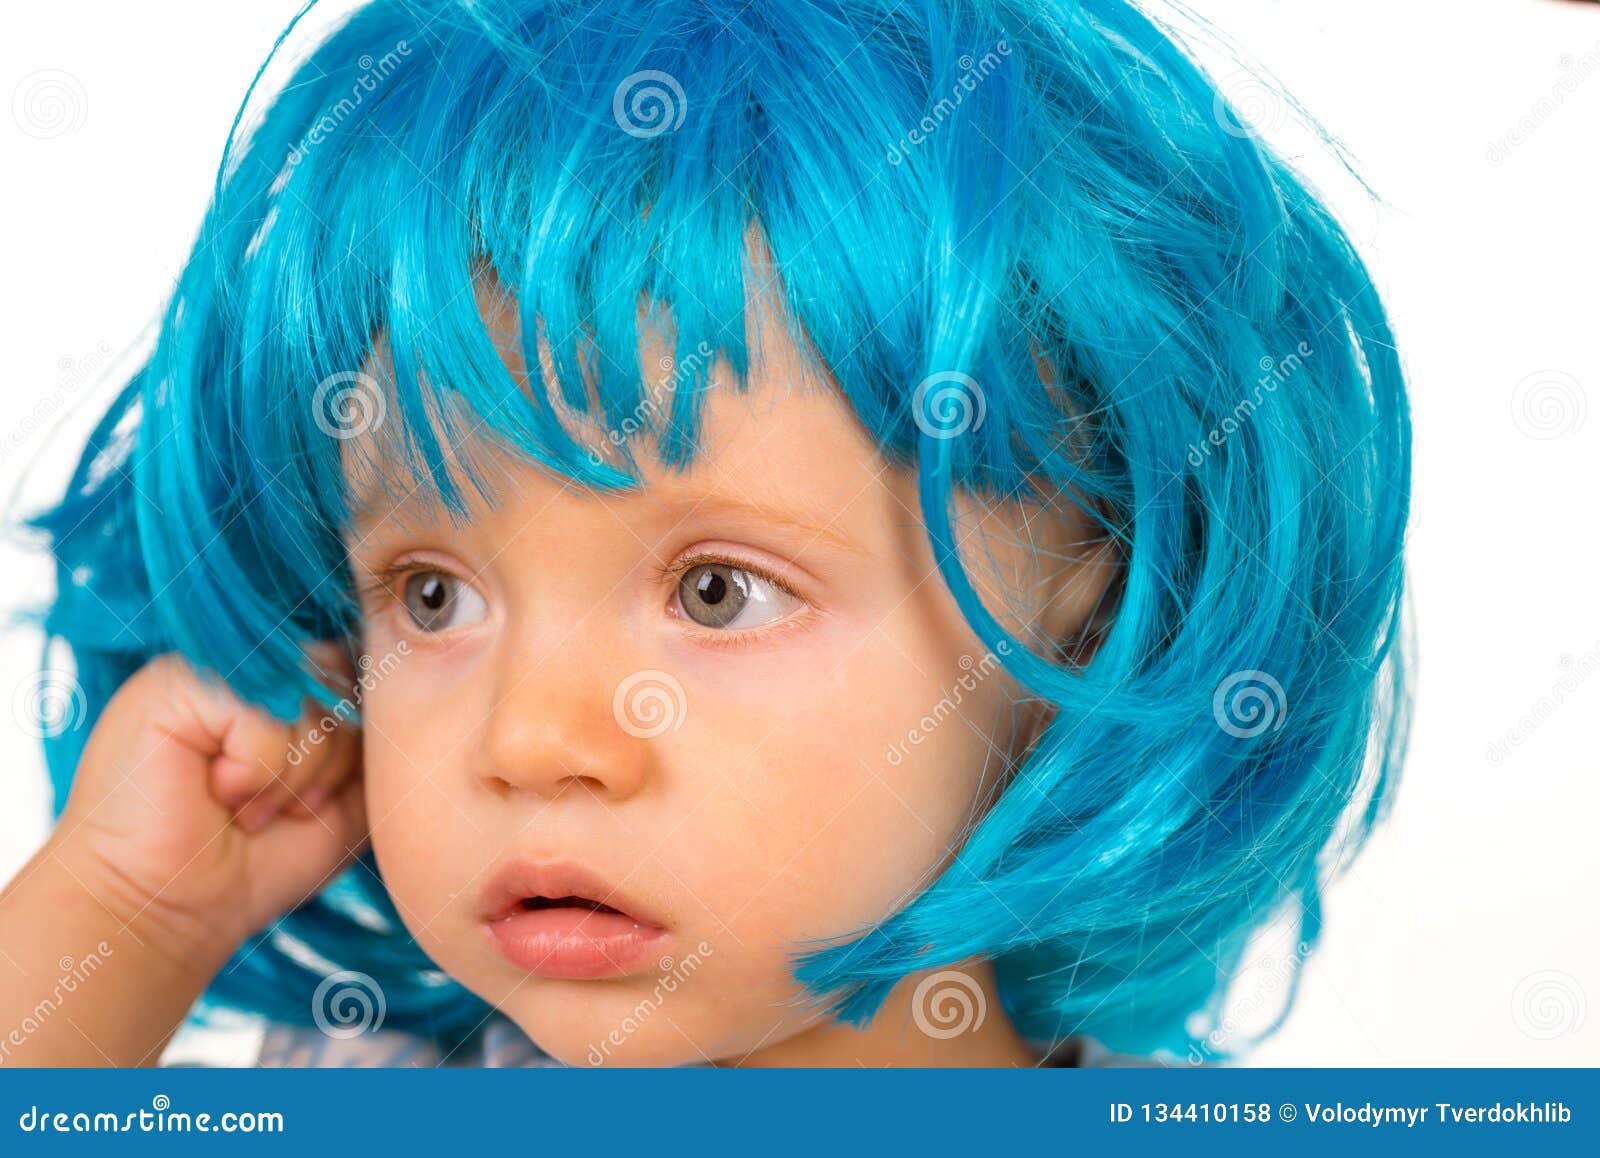 Blue-haired baby boy Halloween costume - wide 6